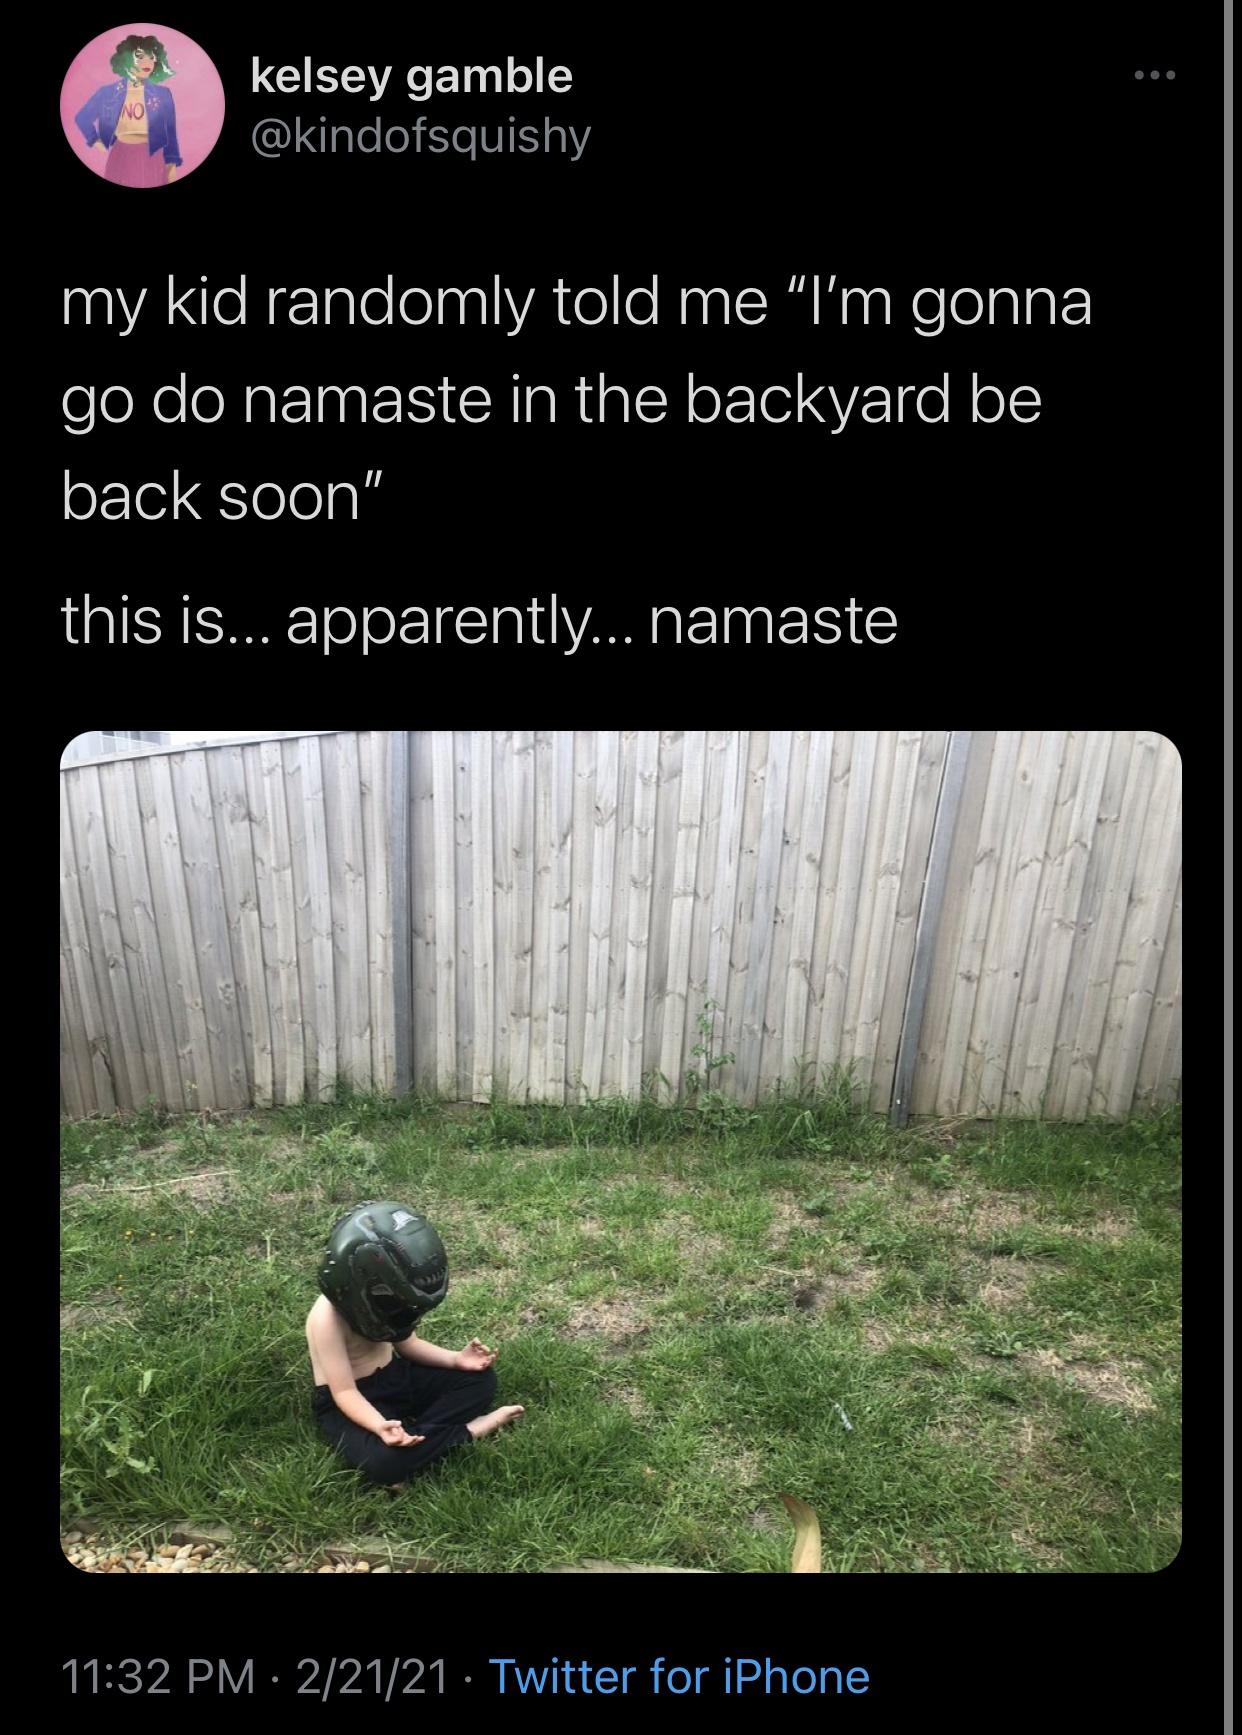 grass - No kelsey gamble my kid randomly told me "I'm gonna go do namaste in the backyard be back soon" this is... apparently... namaste 22121 Twitter for iPhone